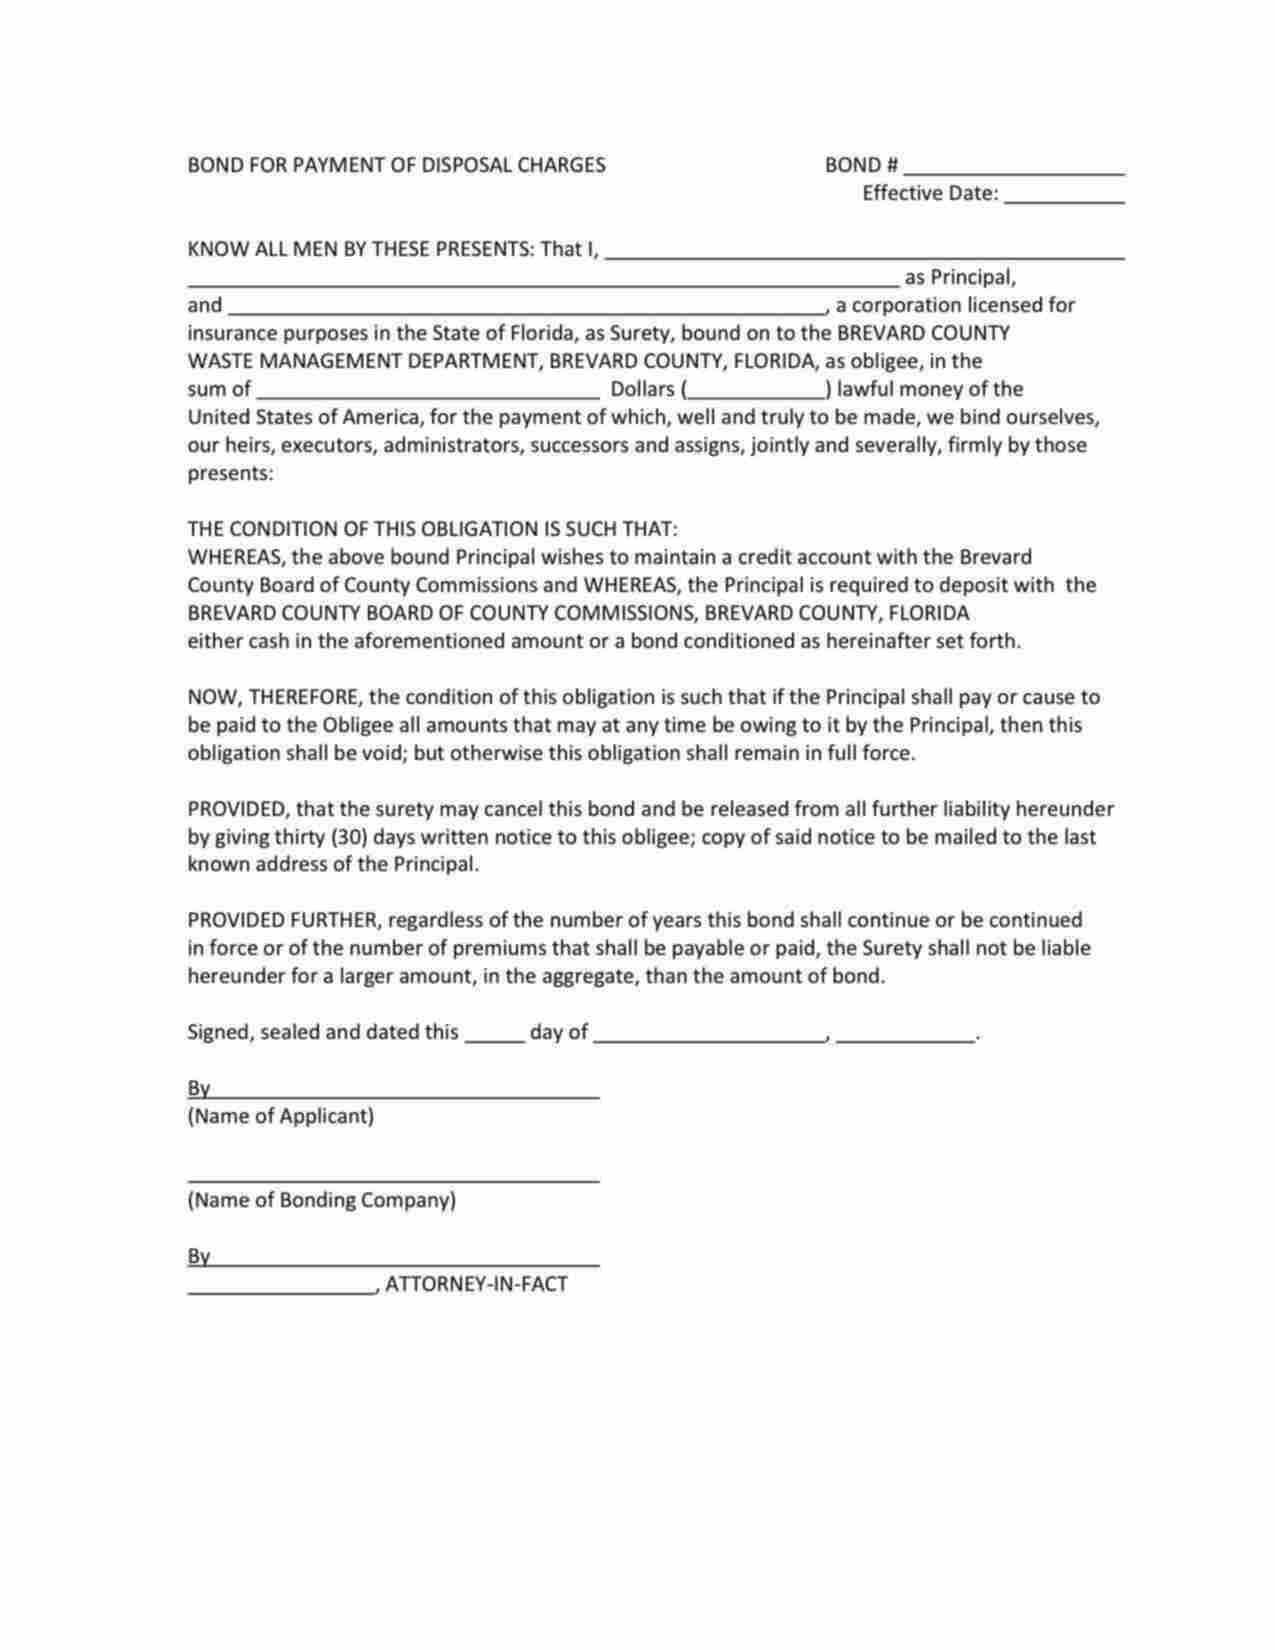 Florida Disposal Charges Bond Form